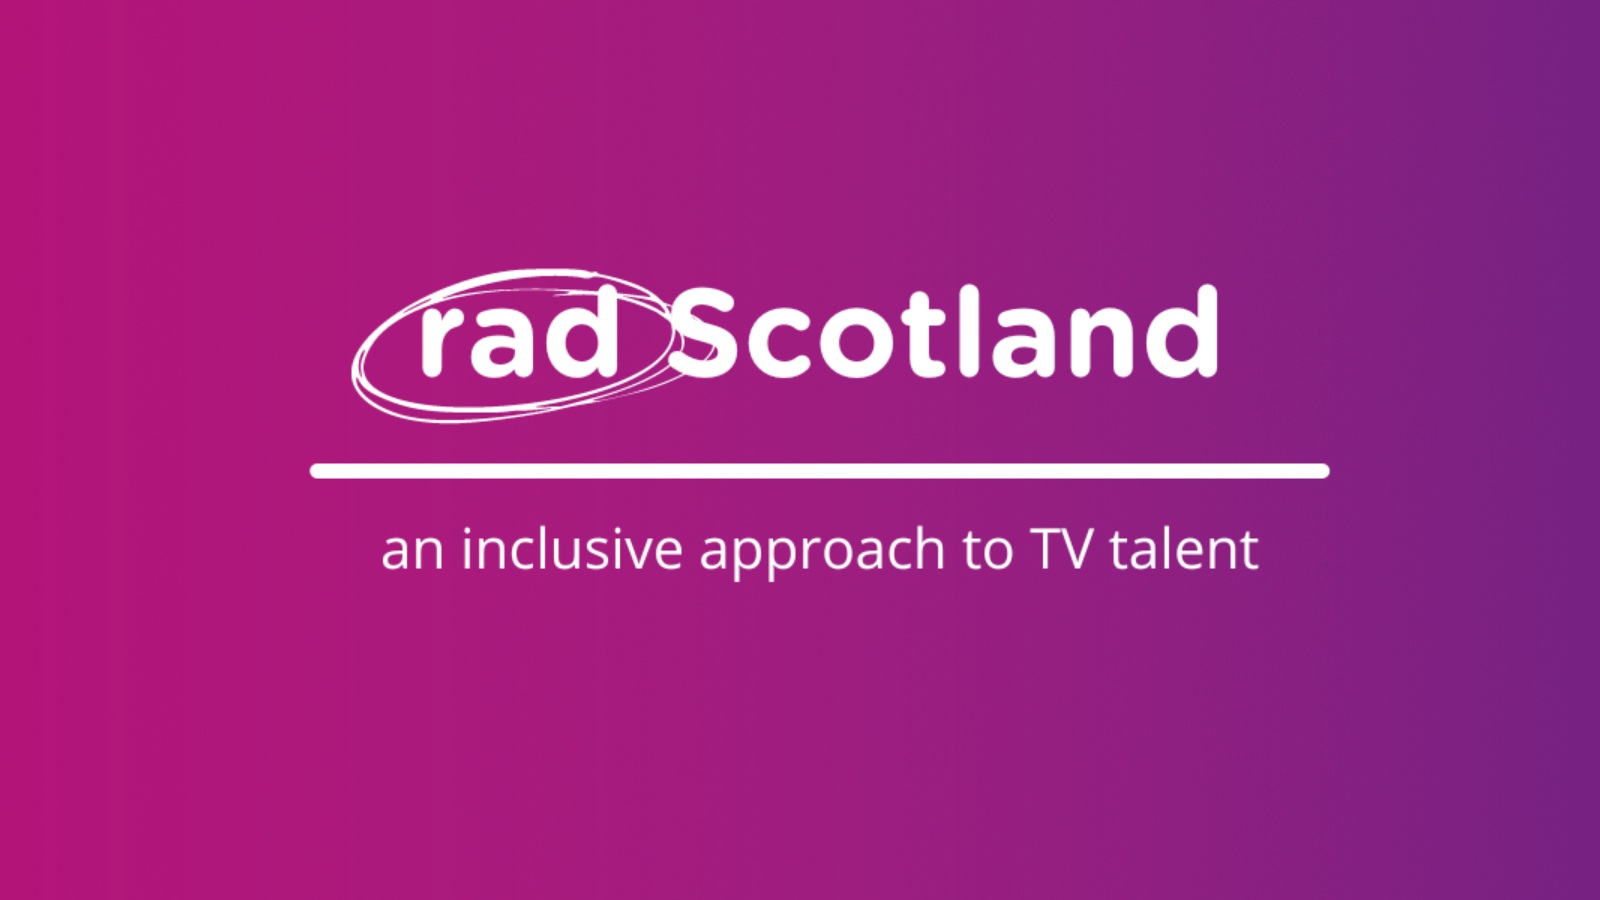 Rad Scotland logo on a maroon background. Text reads rad Scotland, an inclusive approach to TV talent